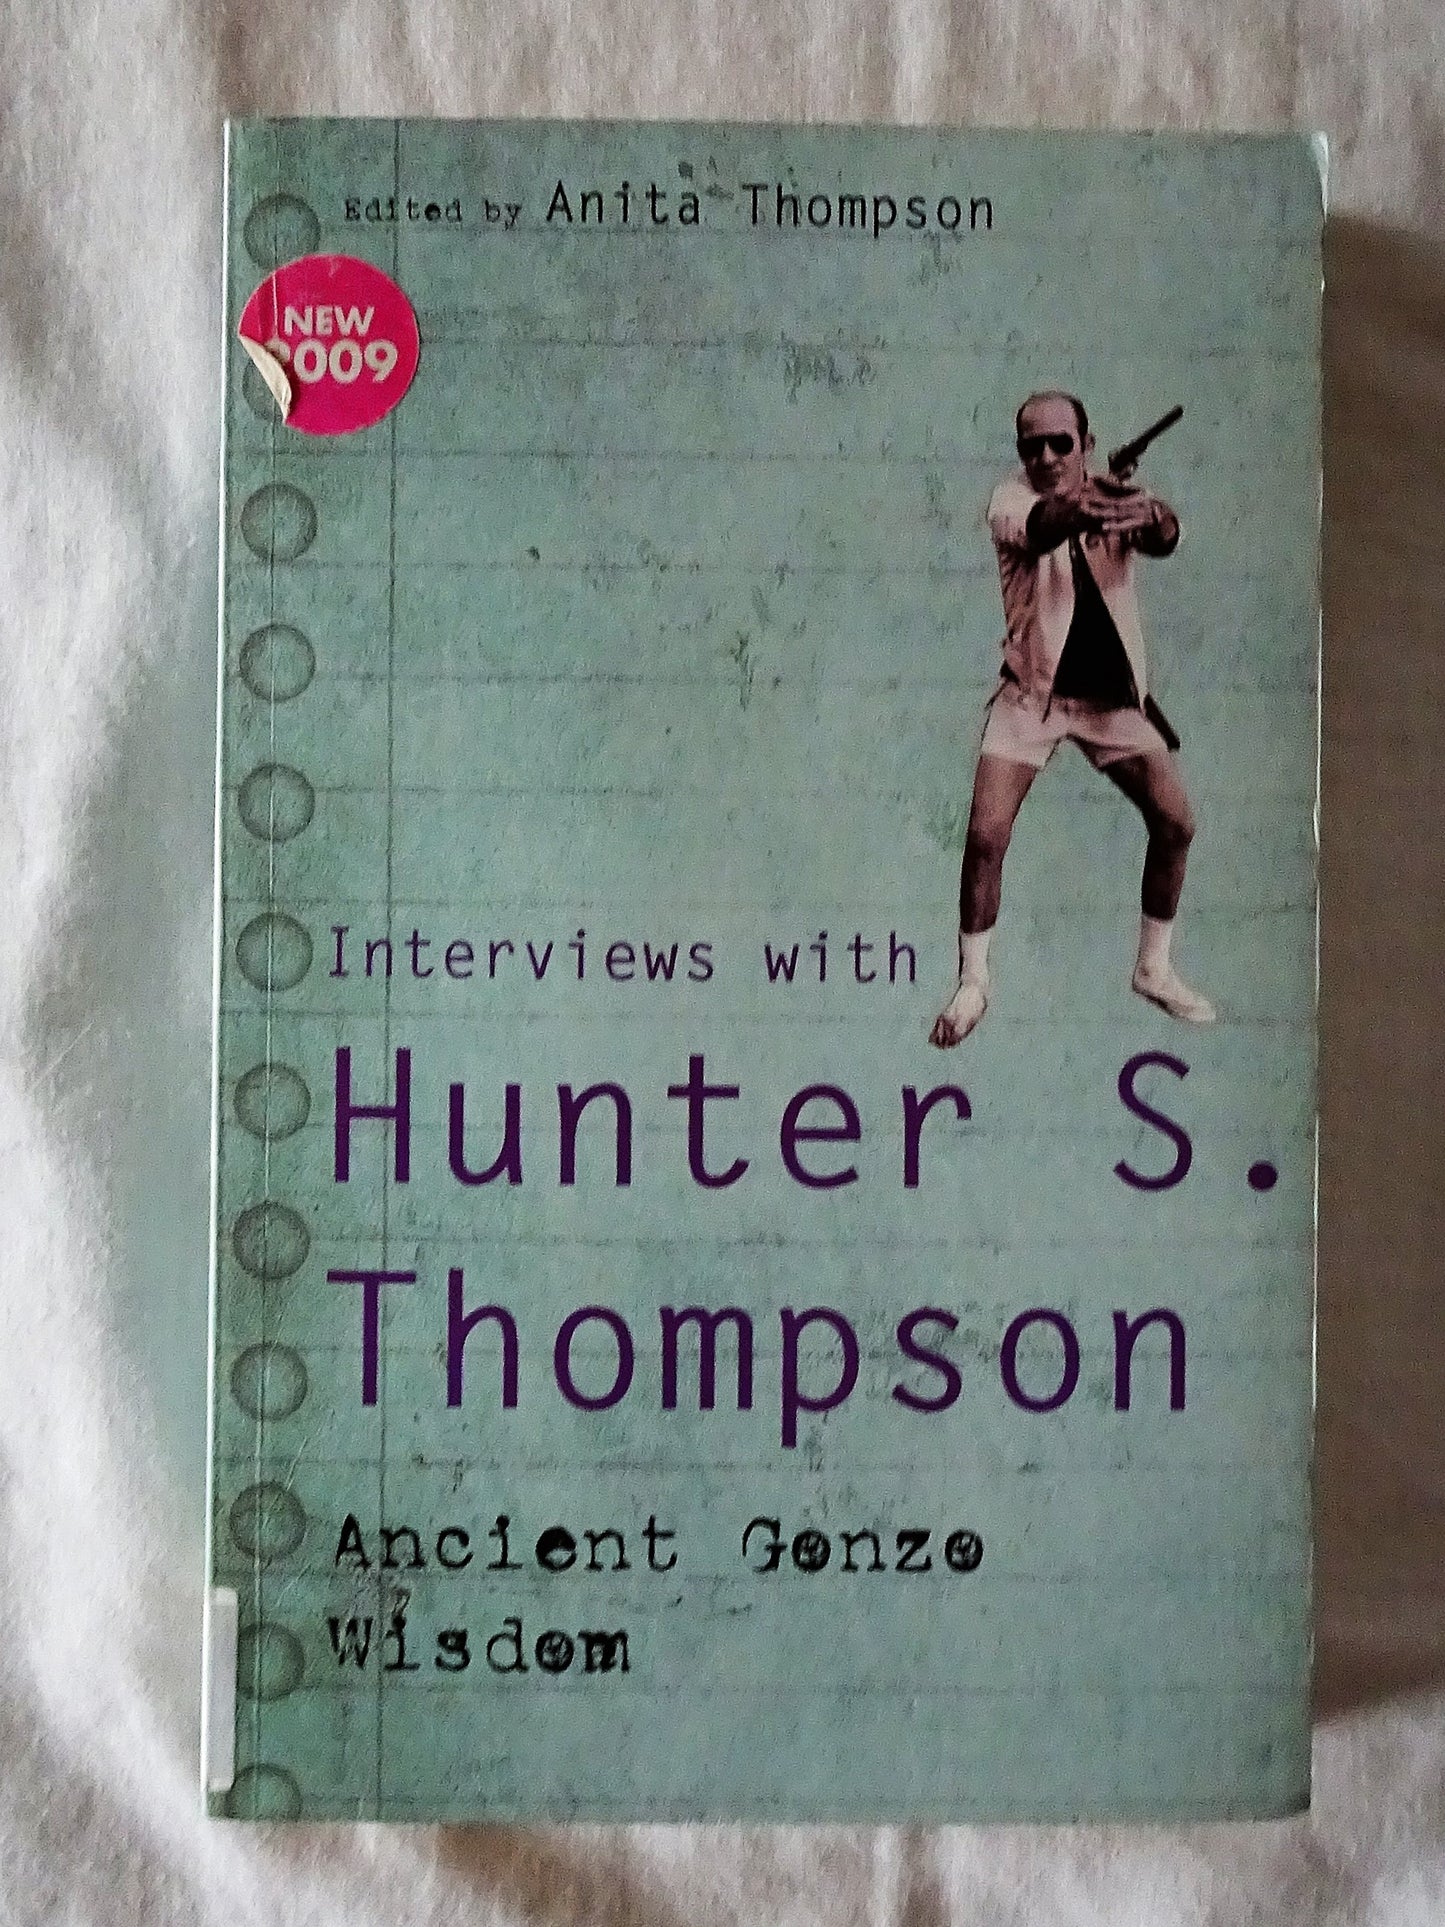 Interviews with Hunter S. Thompson Ancient Gonzo Wisdom by Anita Thompson